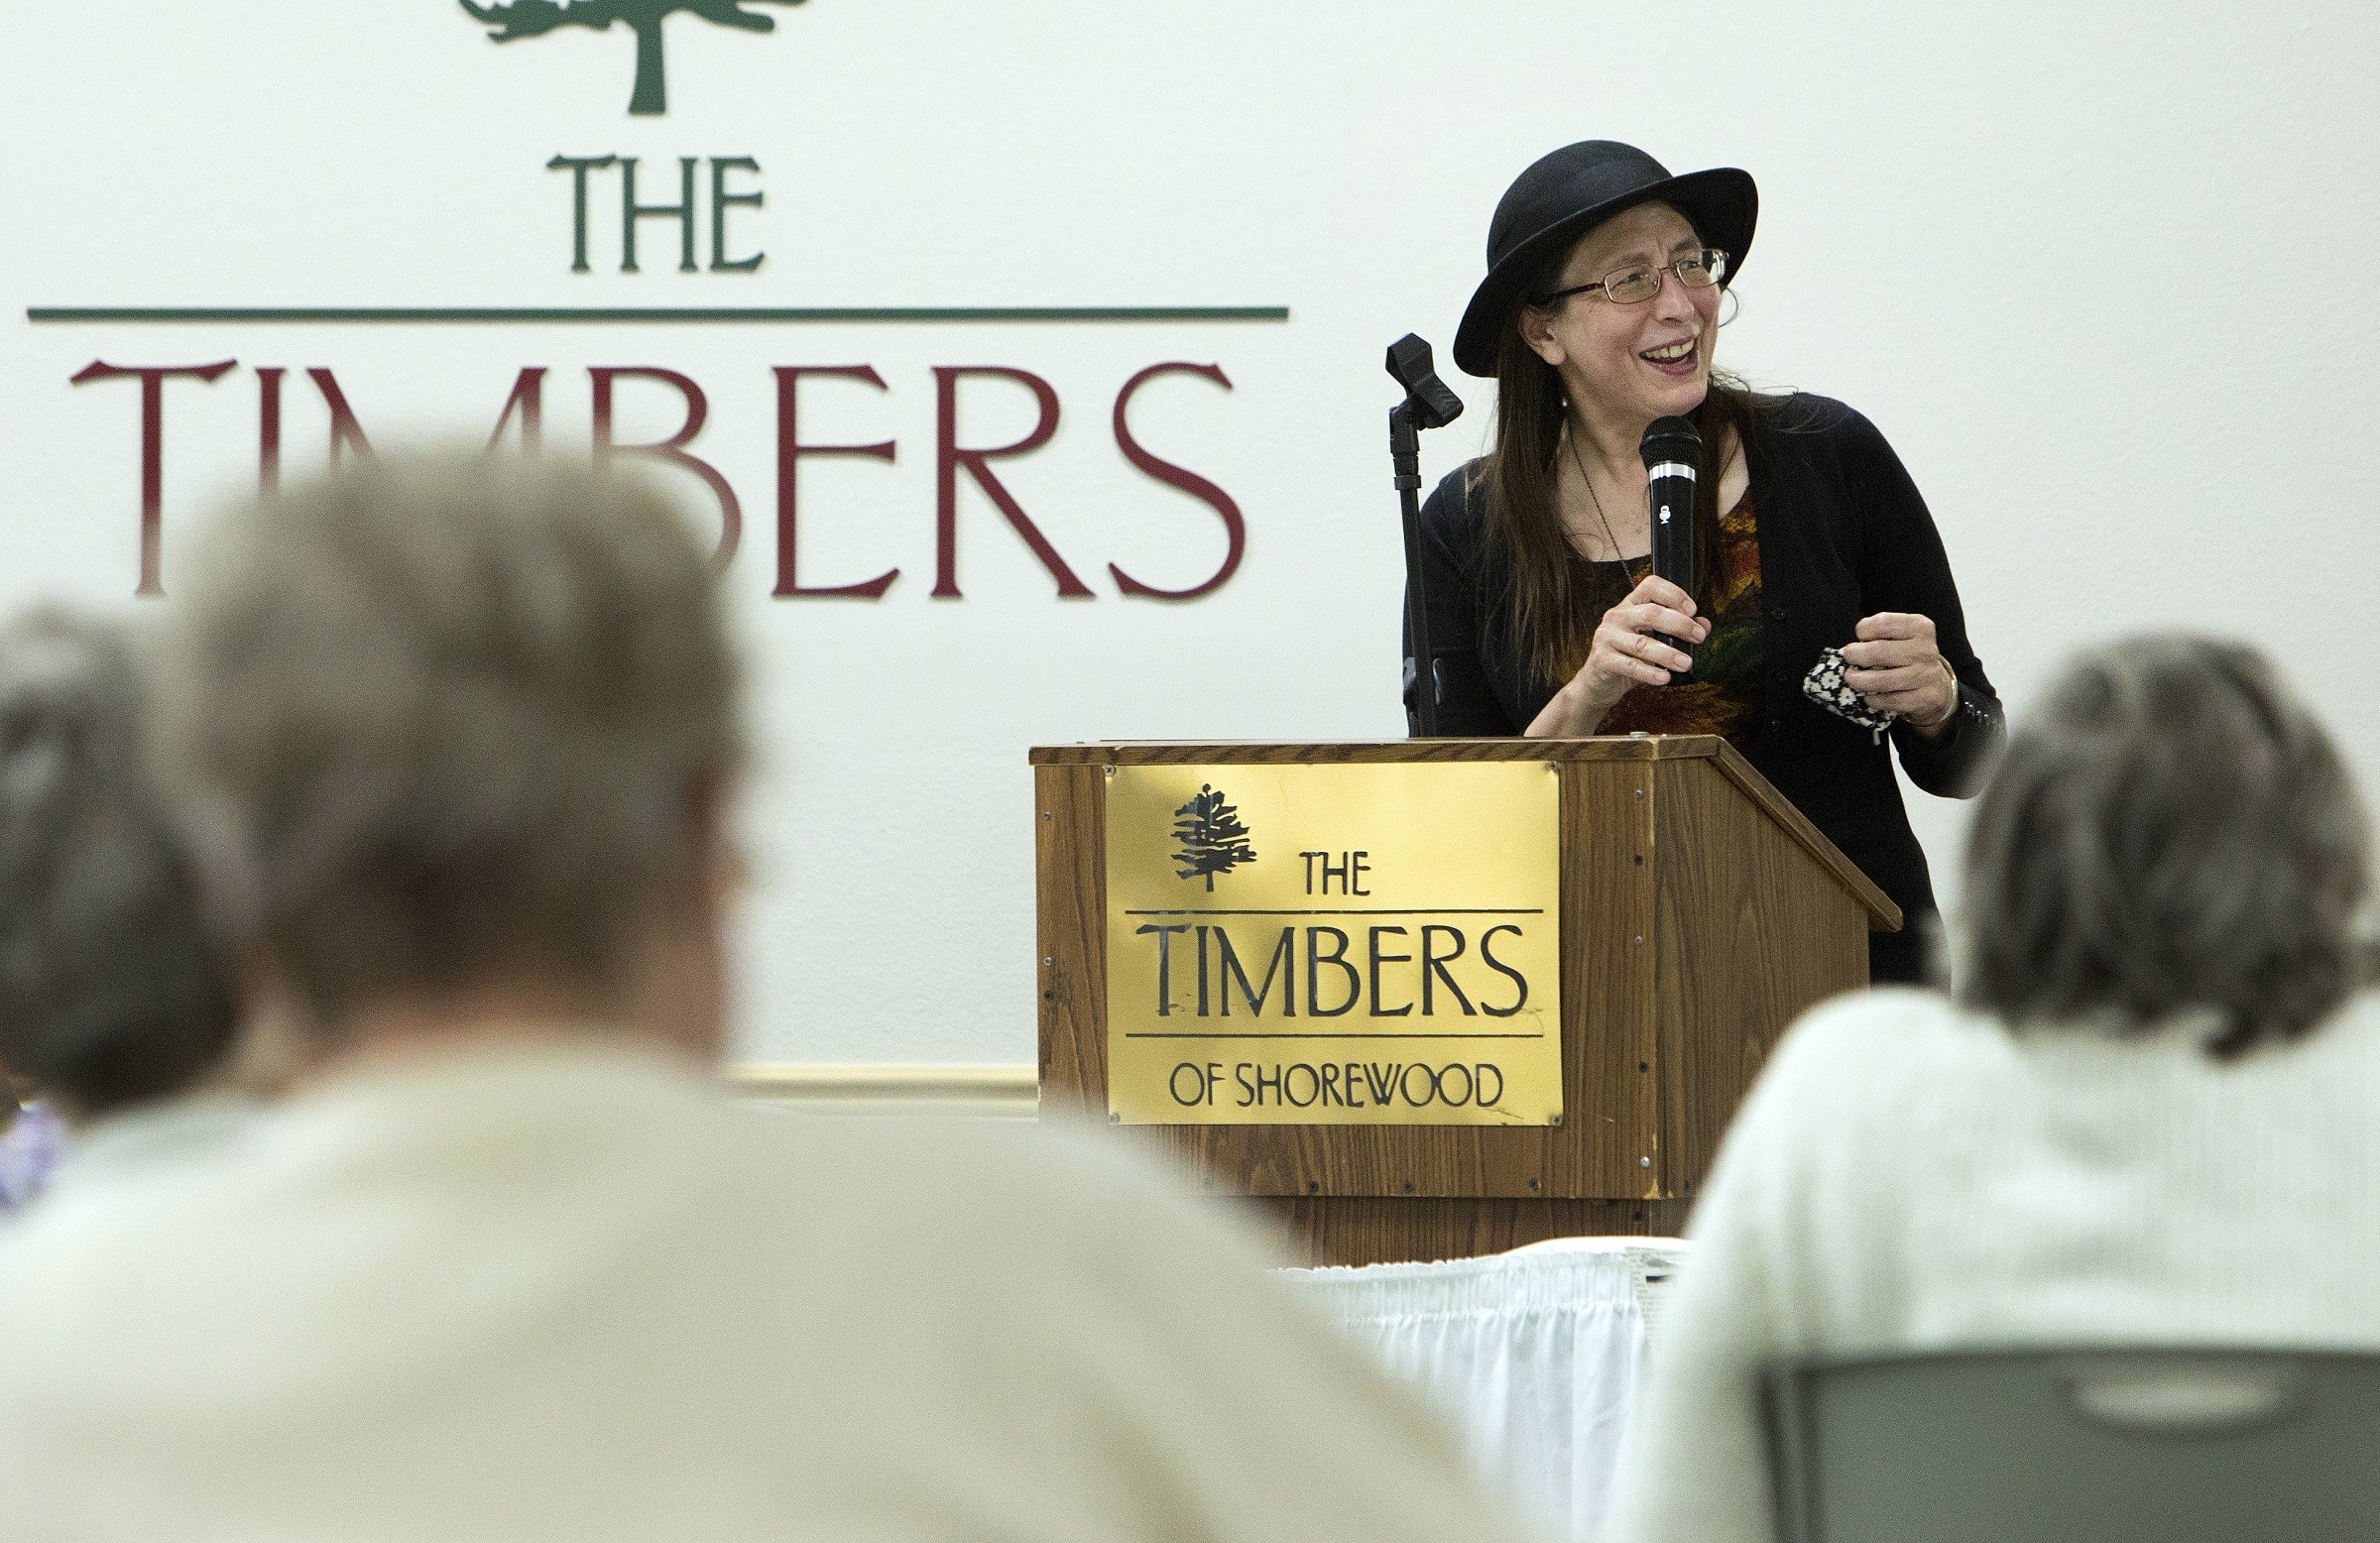 Denise Unland presents at the Timbers of Shorewood